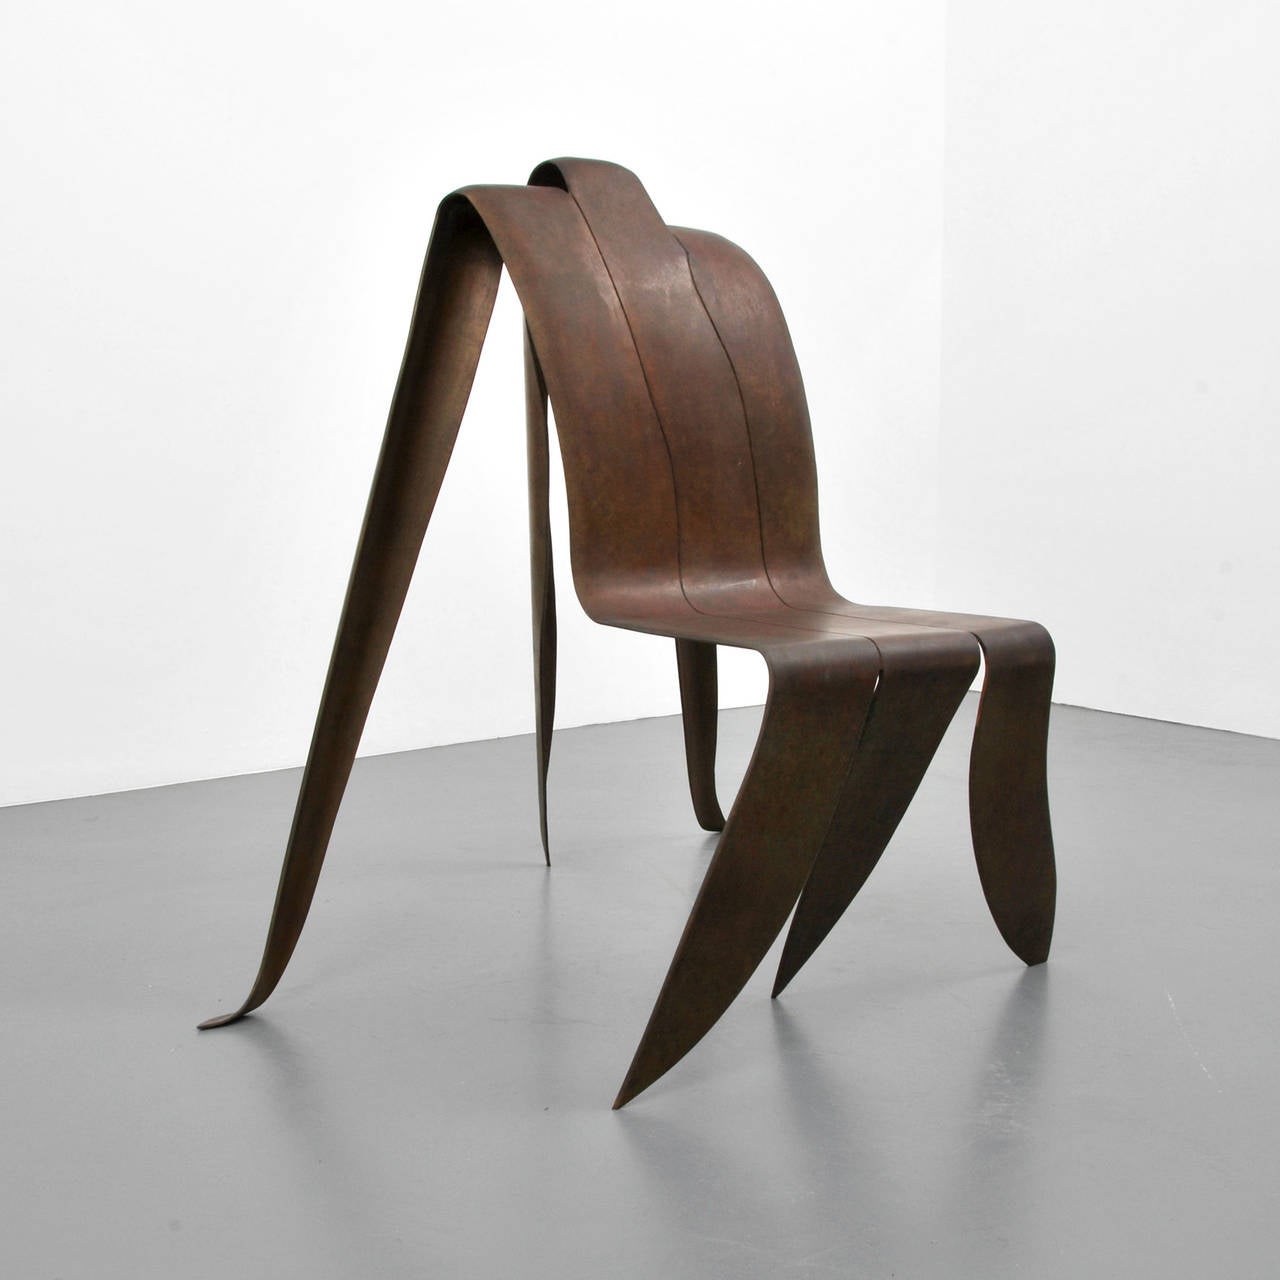 Chair in the manner of Vivian Beer. Provenance: Hokin Galleries, Palm Beach, Florida; Collection, Palm Beach, Florida.

Markings: signed; ed. 6/12; 1993.